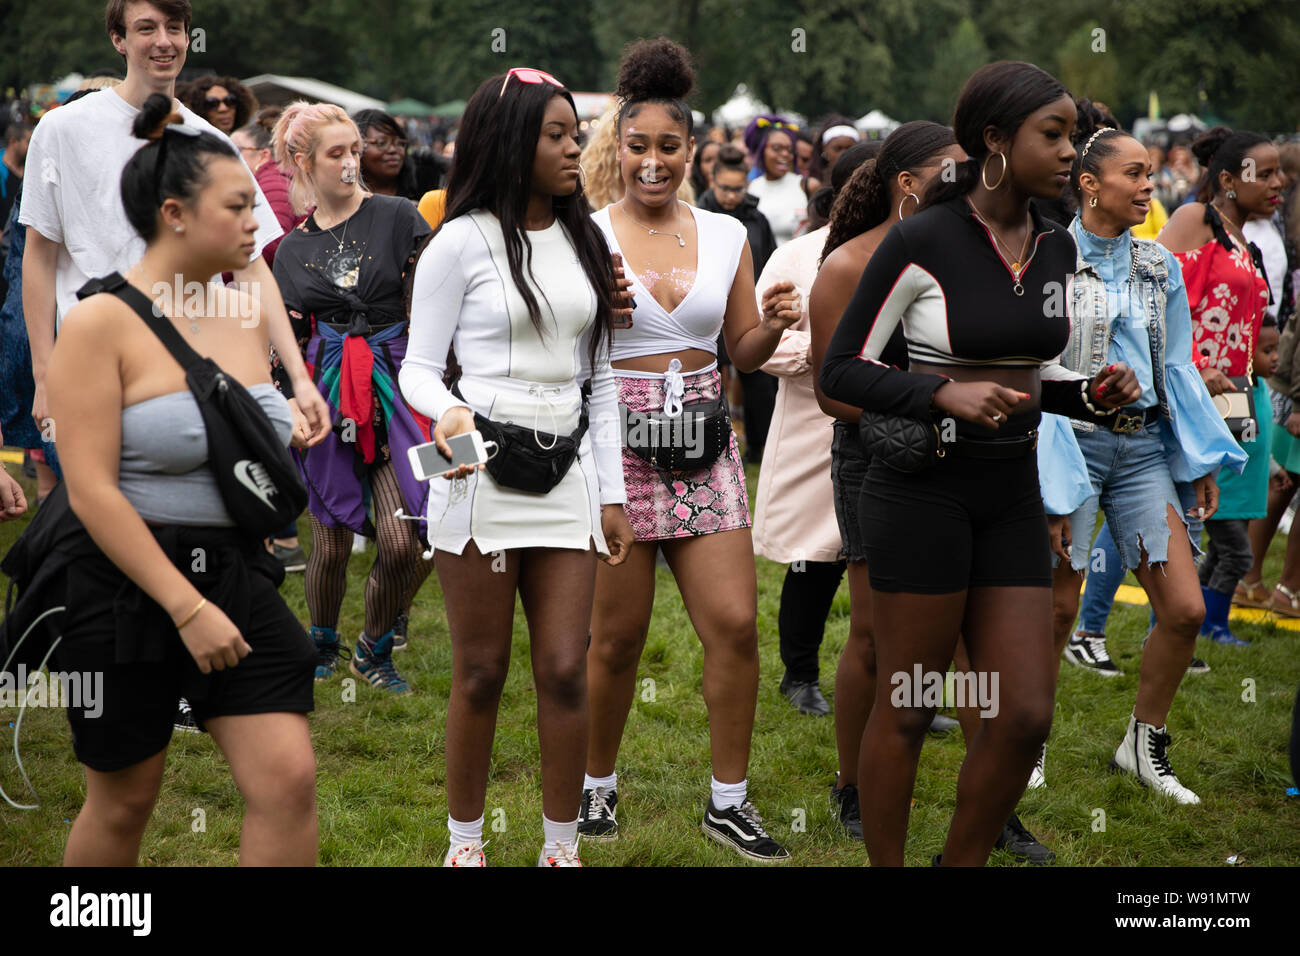 Manchester, UK. 11 AUG 2019. Manchester Caribbean Carnival. People attend the second day of the Manchester Caribbean Carnival. The theme of the annual event is diversity and inclusivity. Credit: Jonathan Nicholson/Alamy Live News. Stock Photo